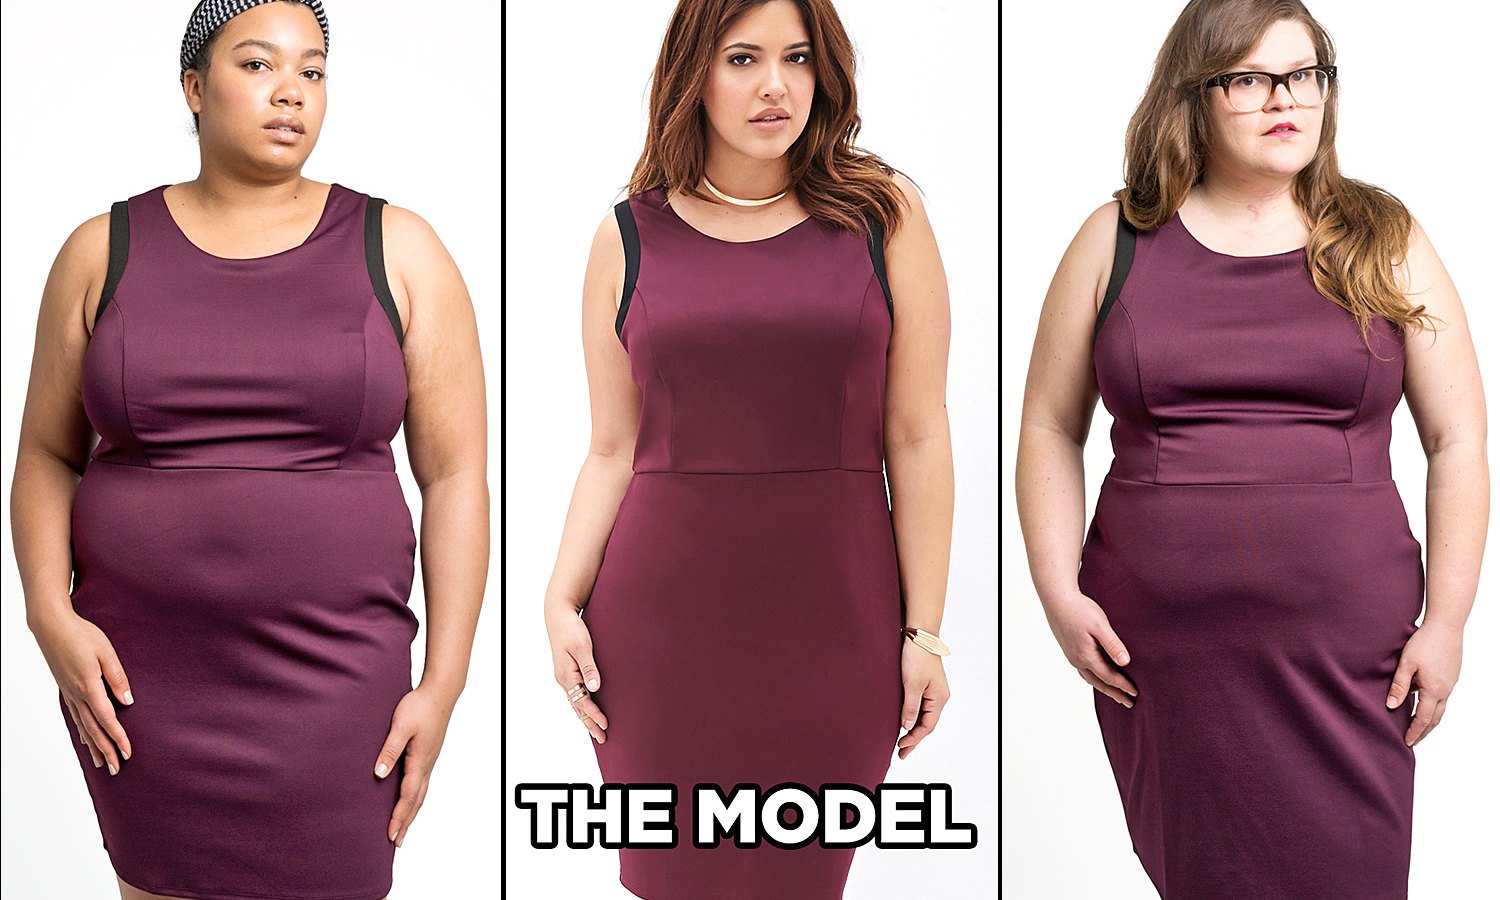 Plus-Size Clothing on Real Women